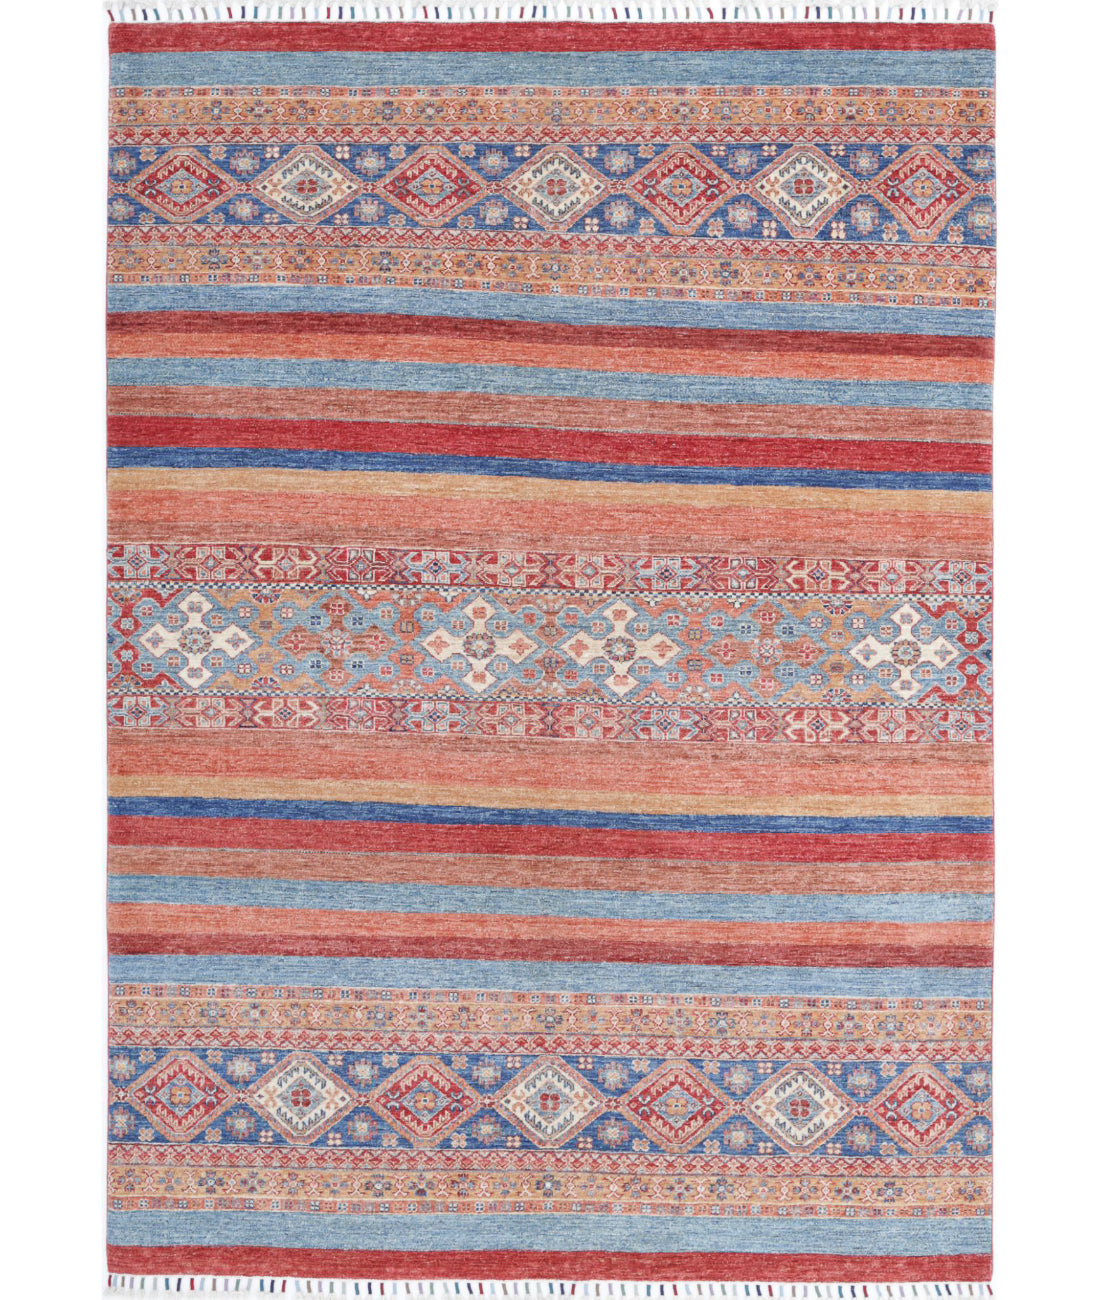 Hand Knotted Khurjeen Wool Rug - 5'9'' x 8'5'' 5'9'' x 8'5'' (173 X 253) / Multi / Blue